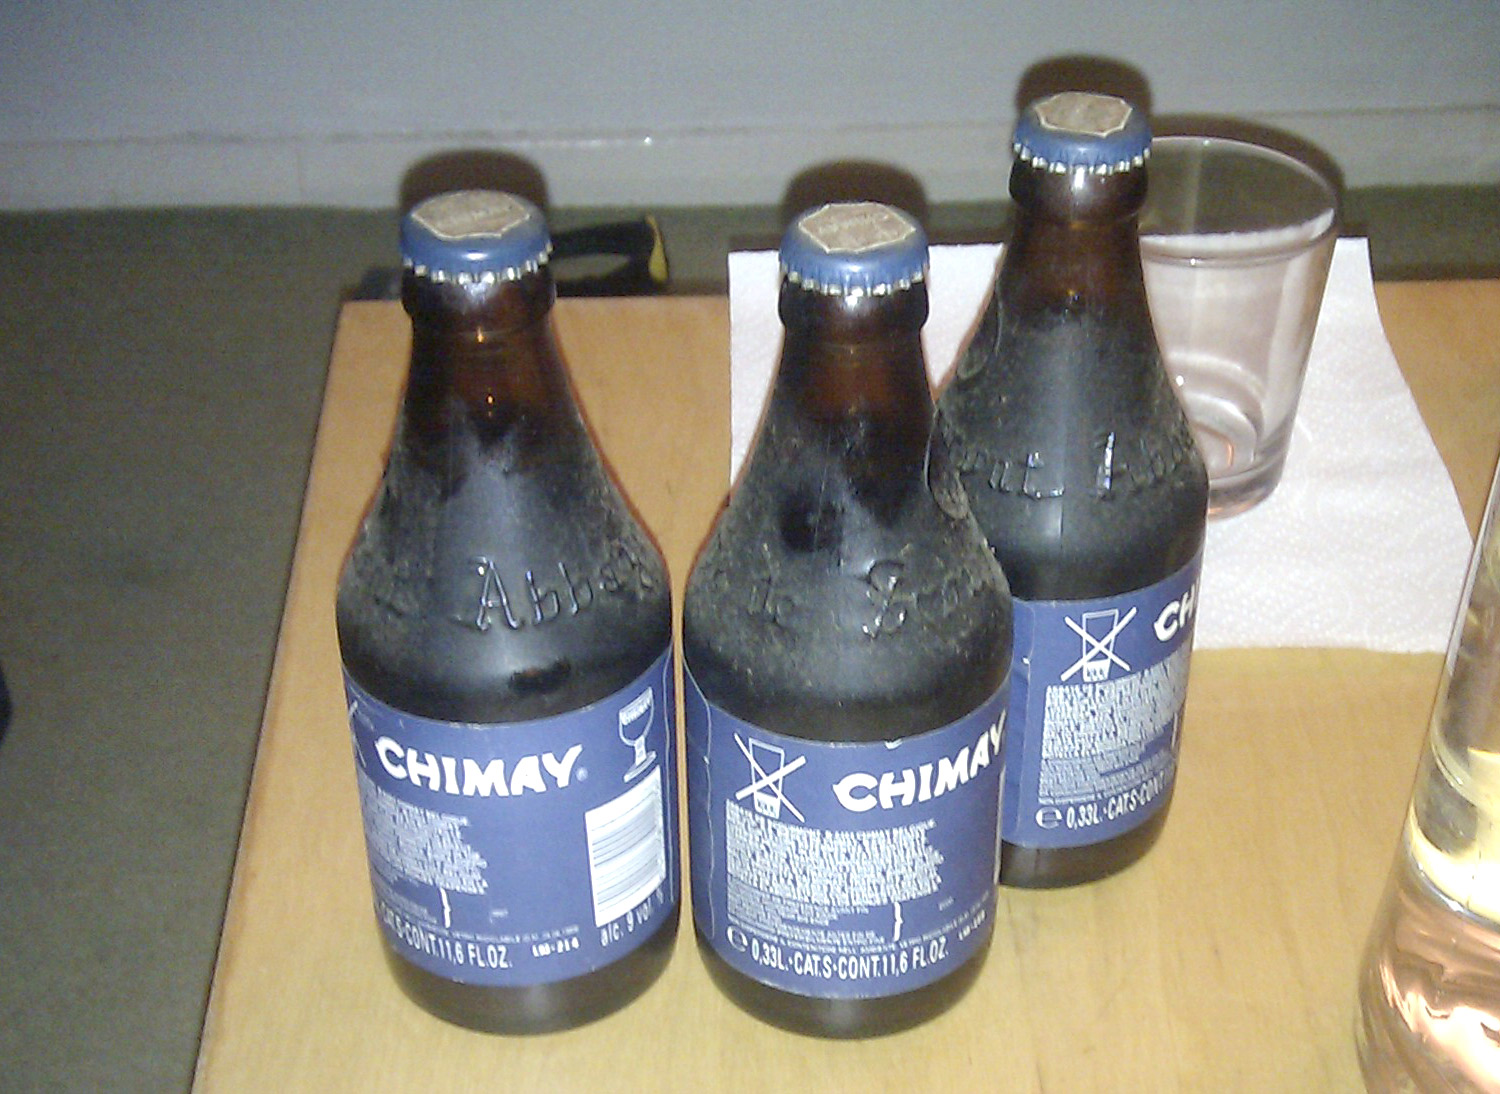 three little birds (from Chimay)